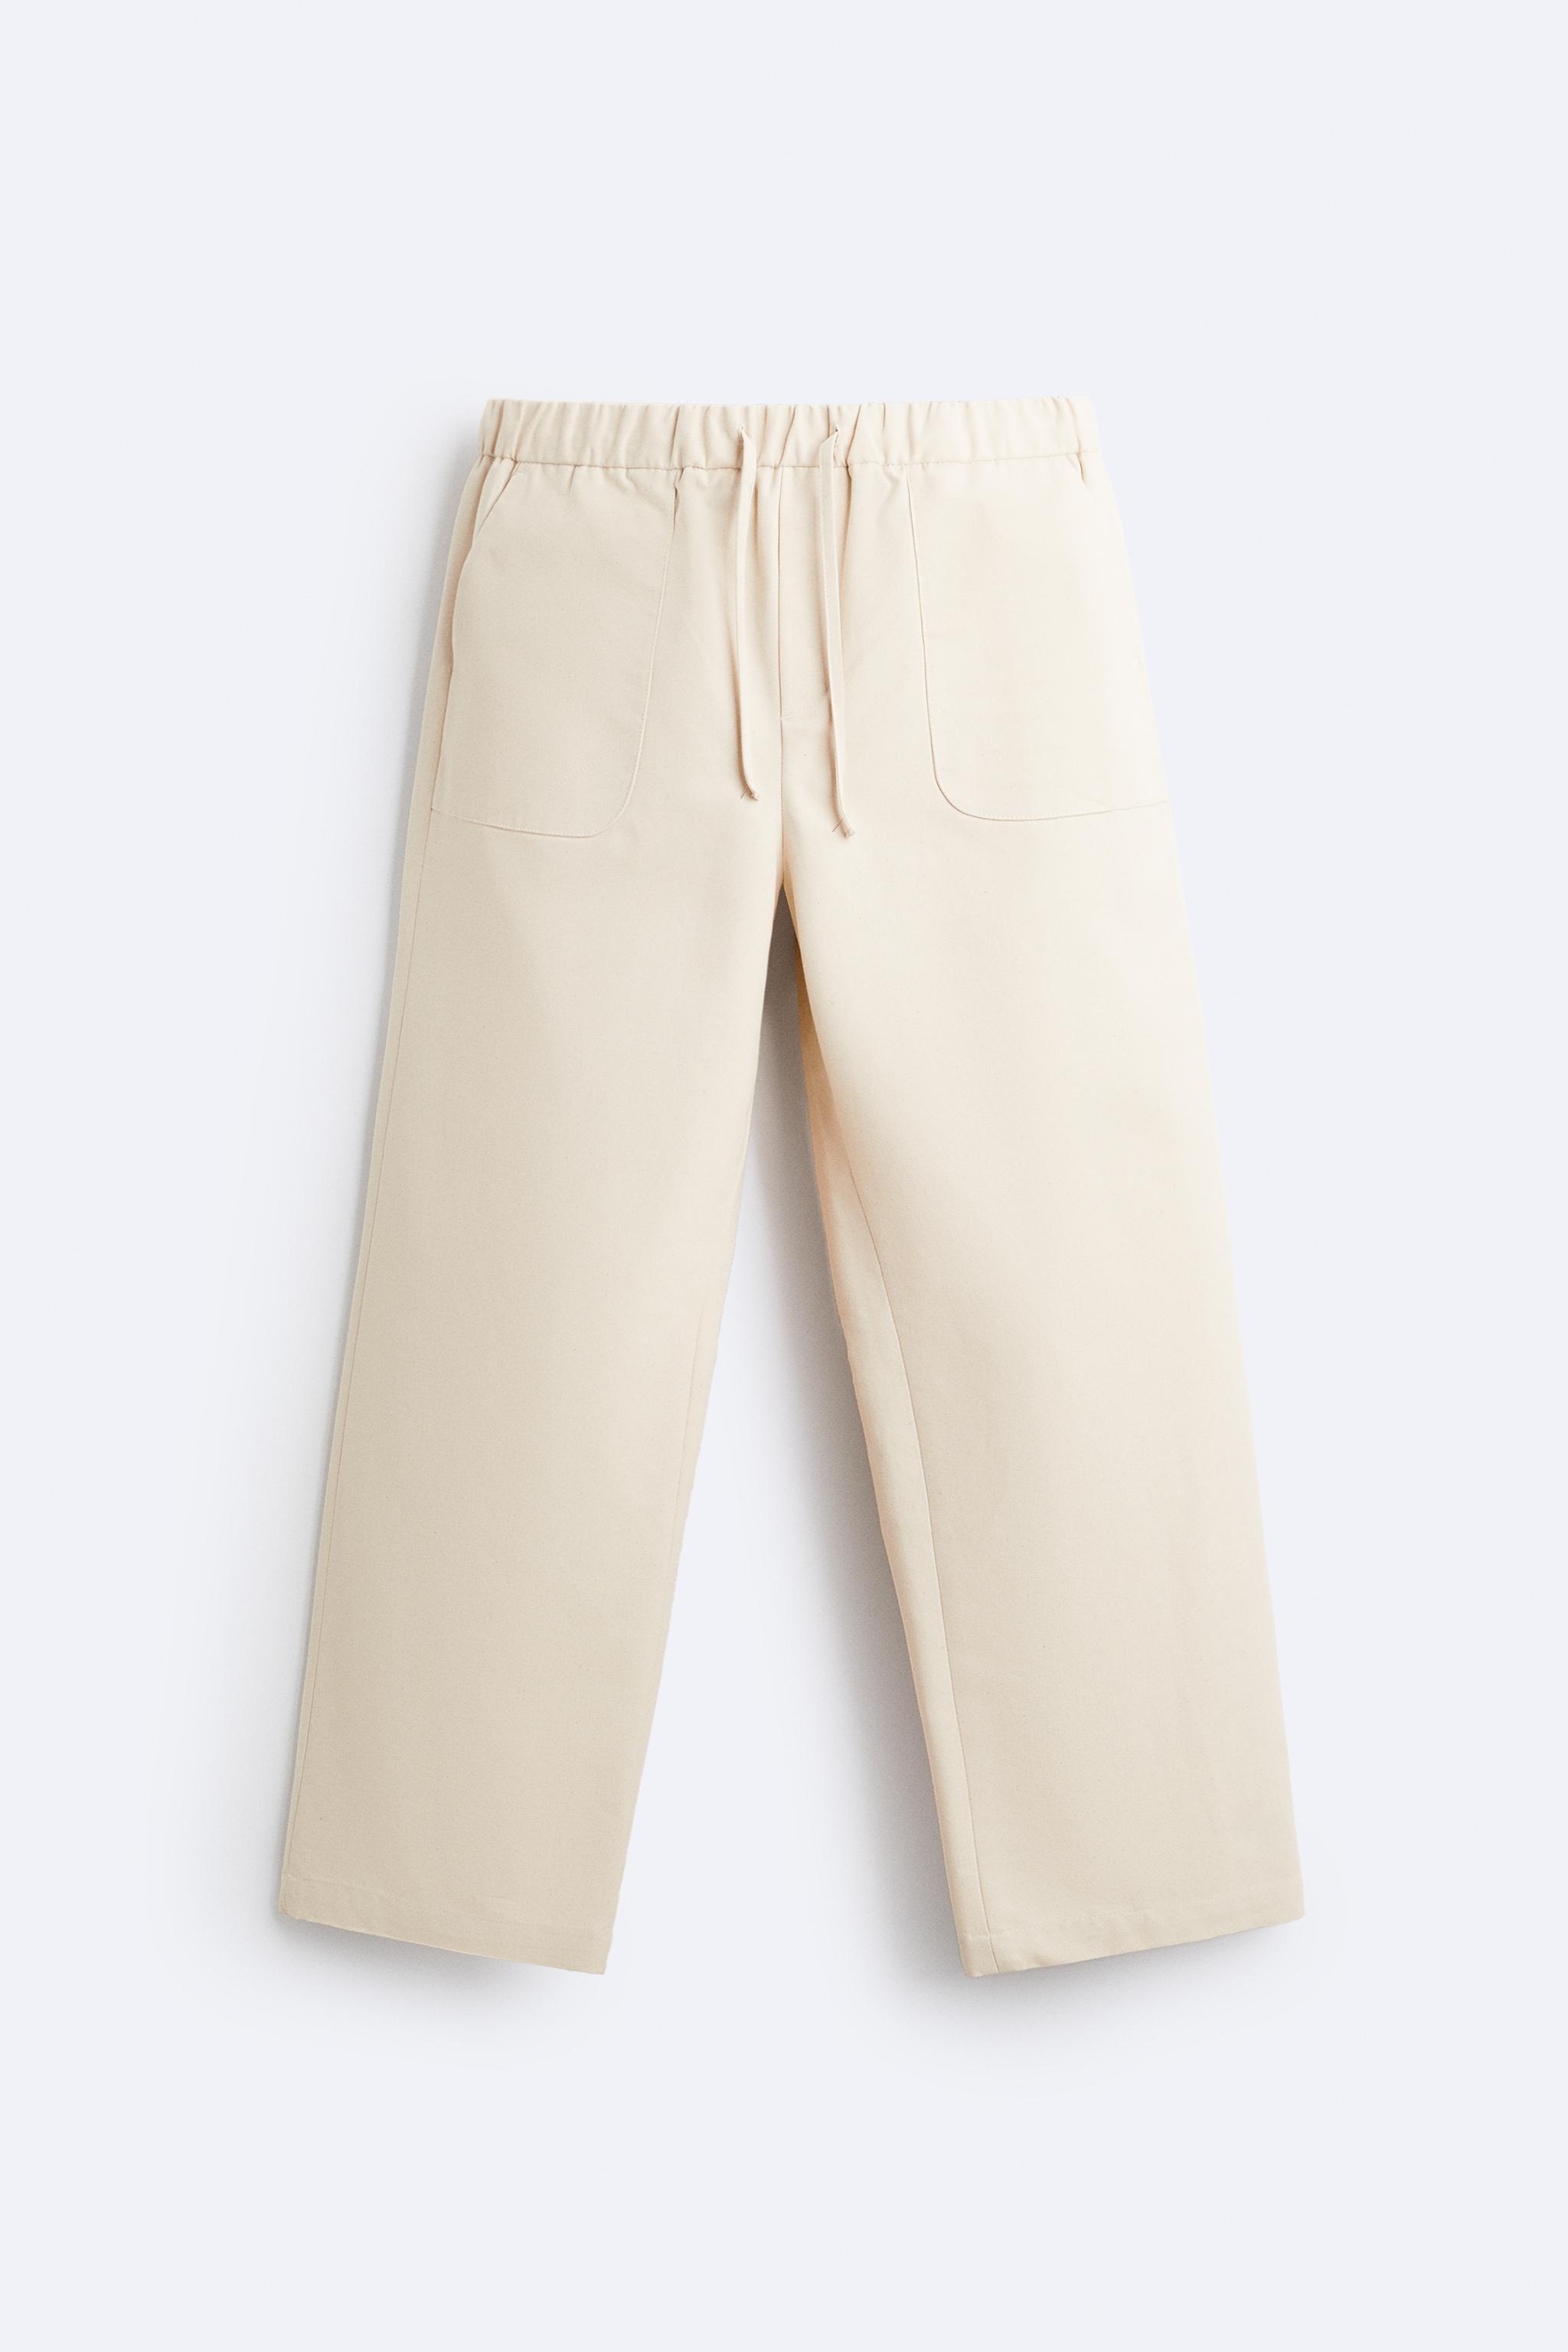 LYOCELL BLEND PANTS - taupe brown